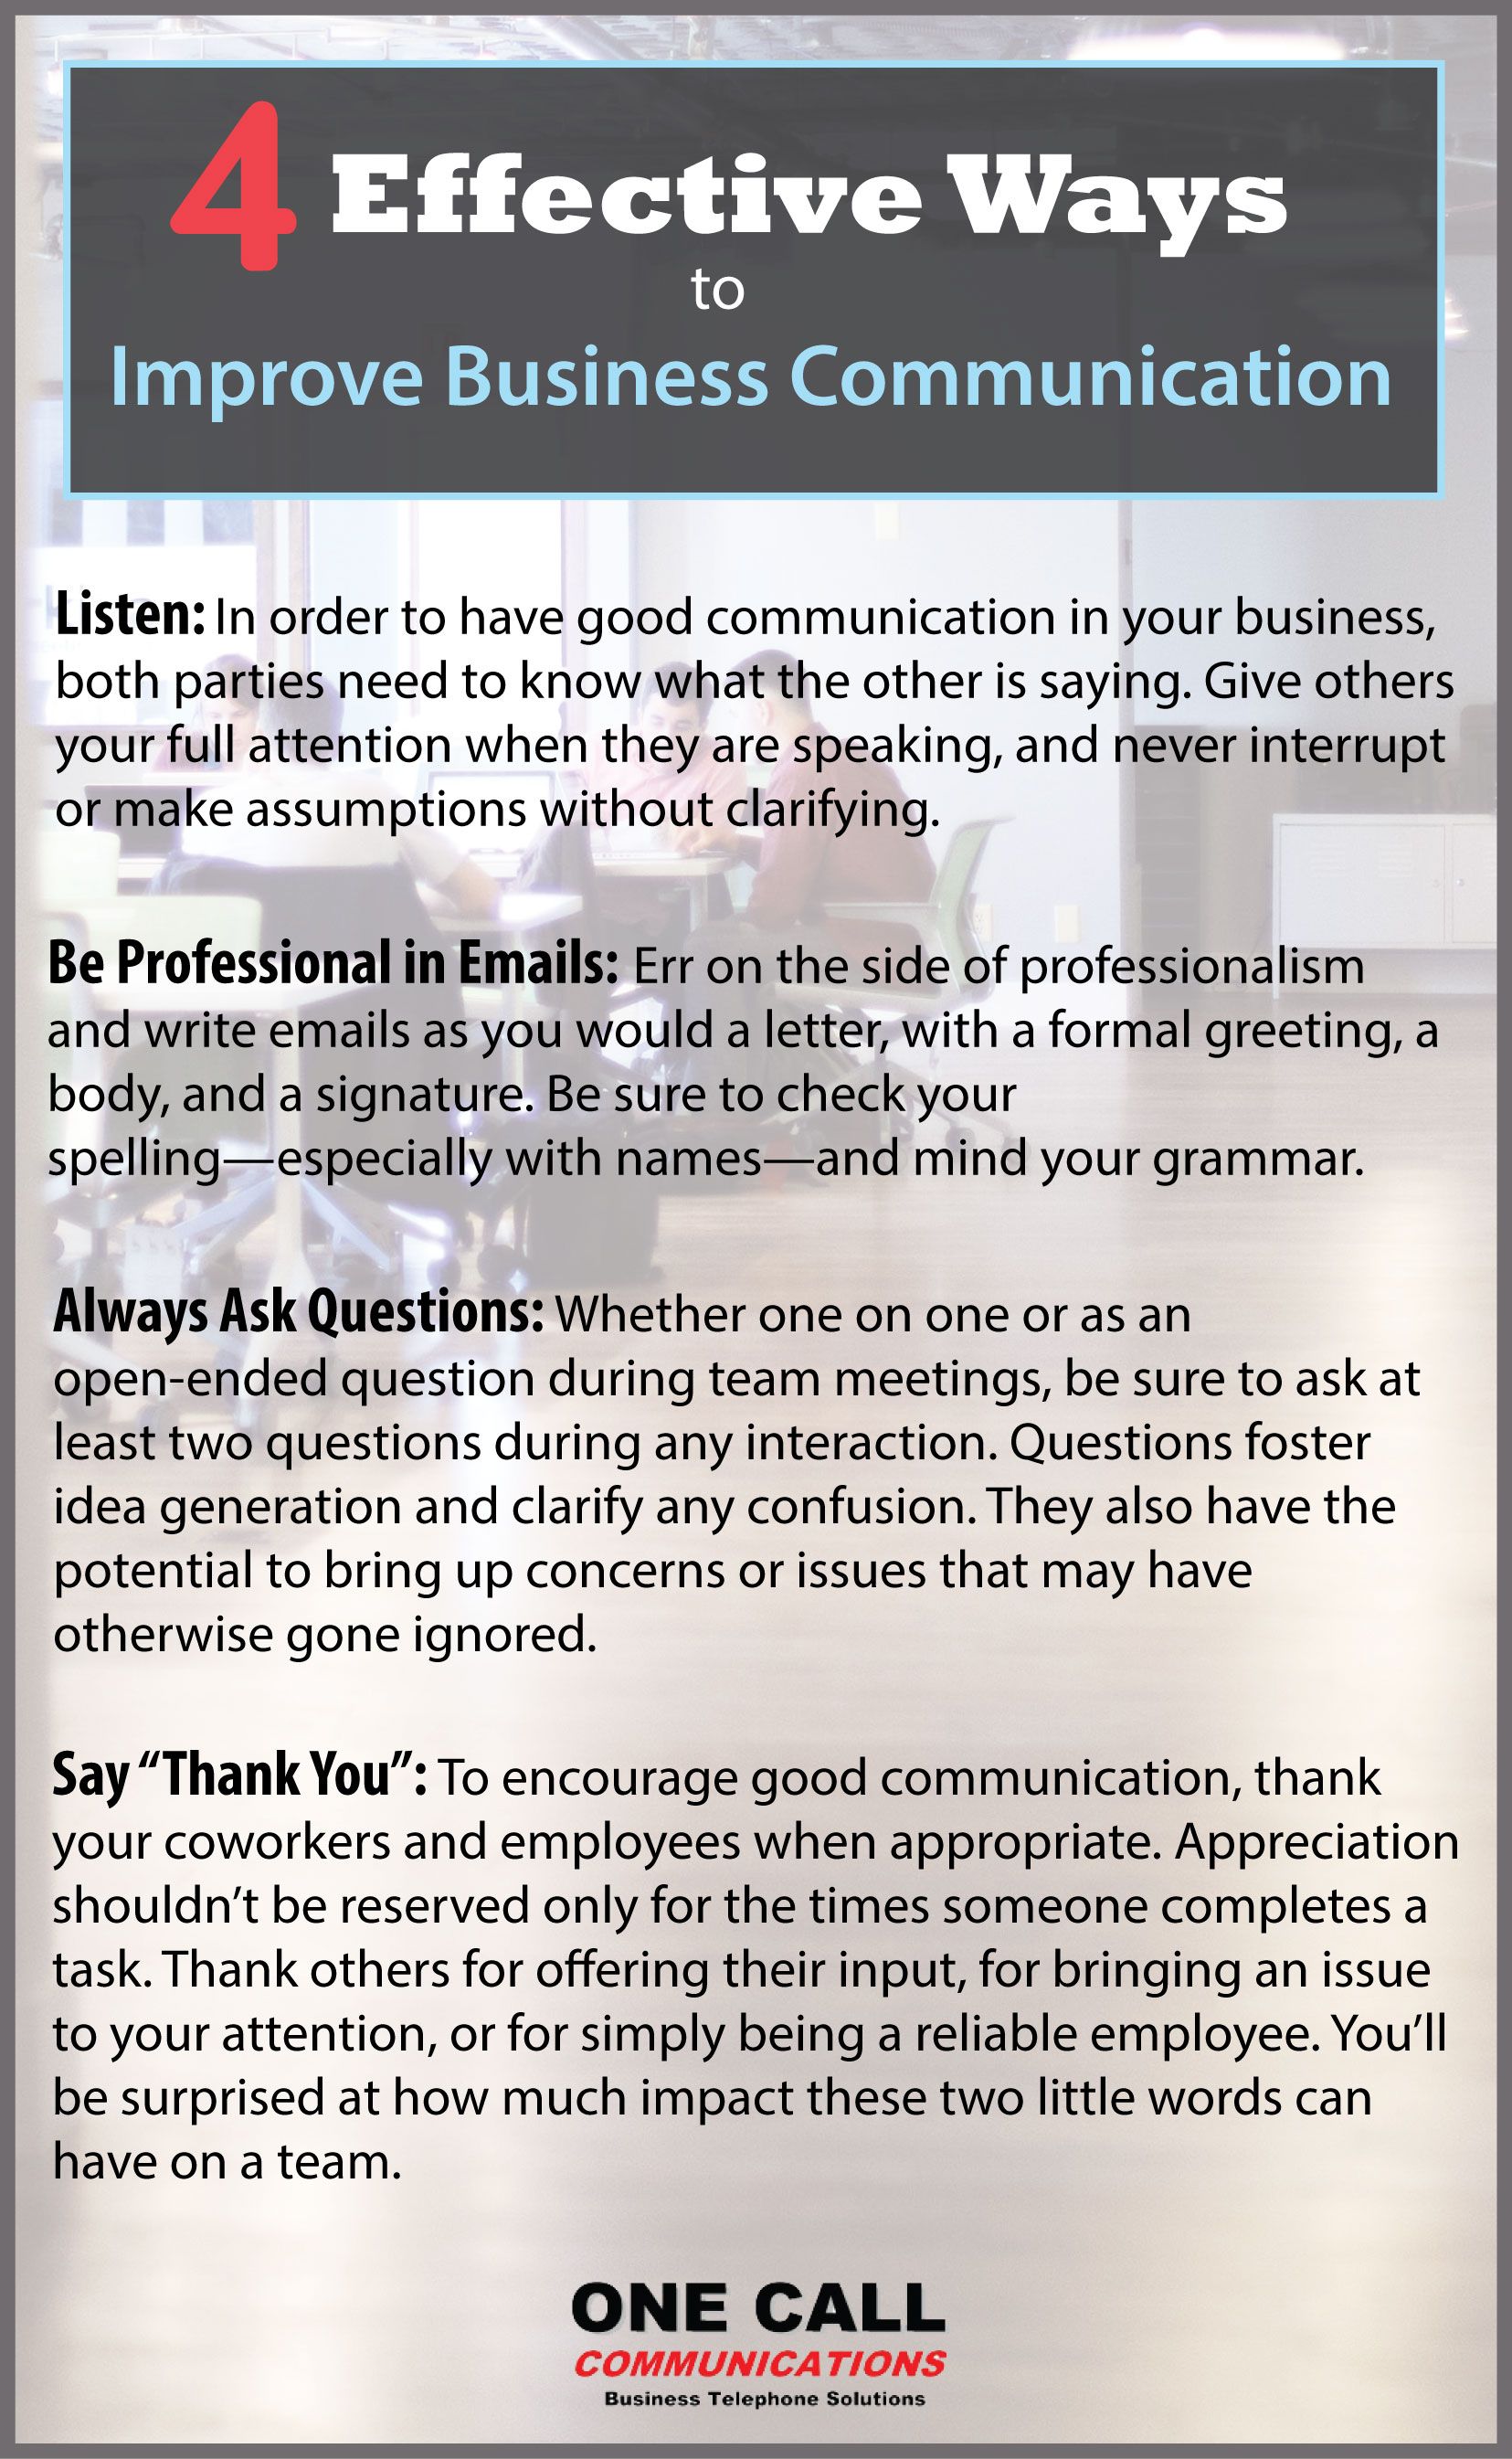 4 Effective Ways to Improve Business Communication